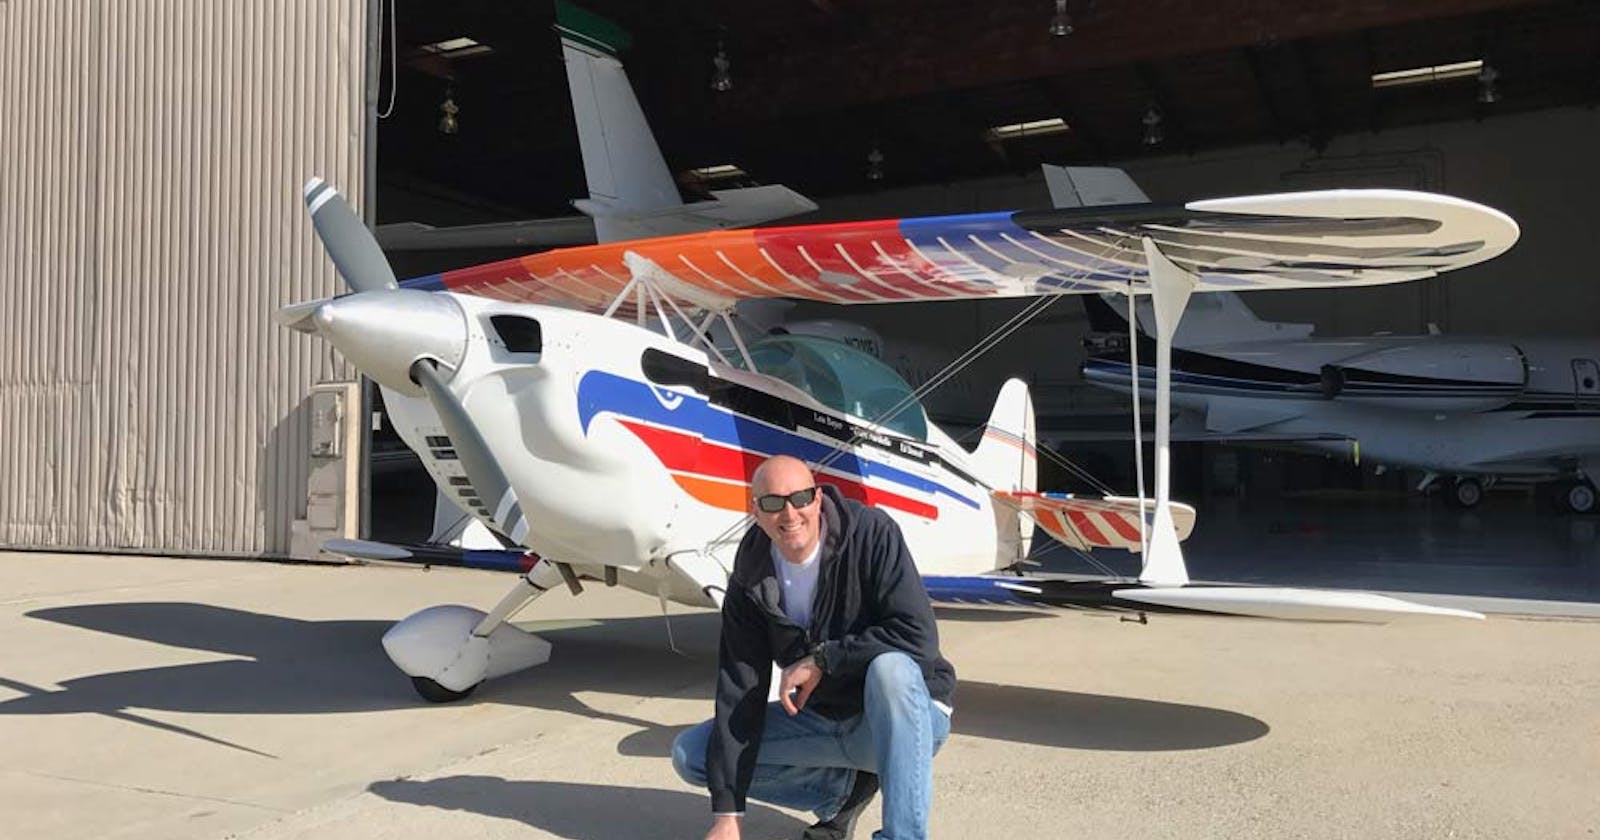 Armando Poeta’s Flying Essentials: Learn What Being a Pilot Means